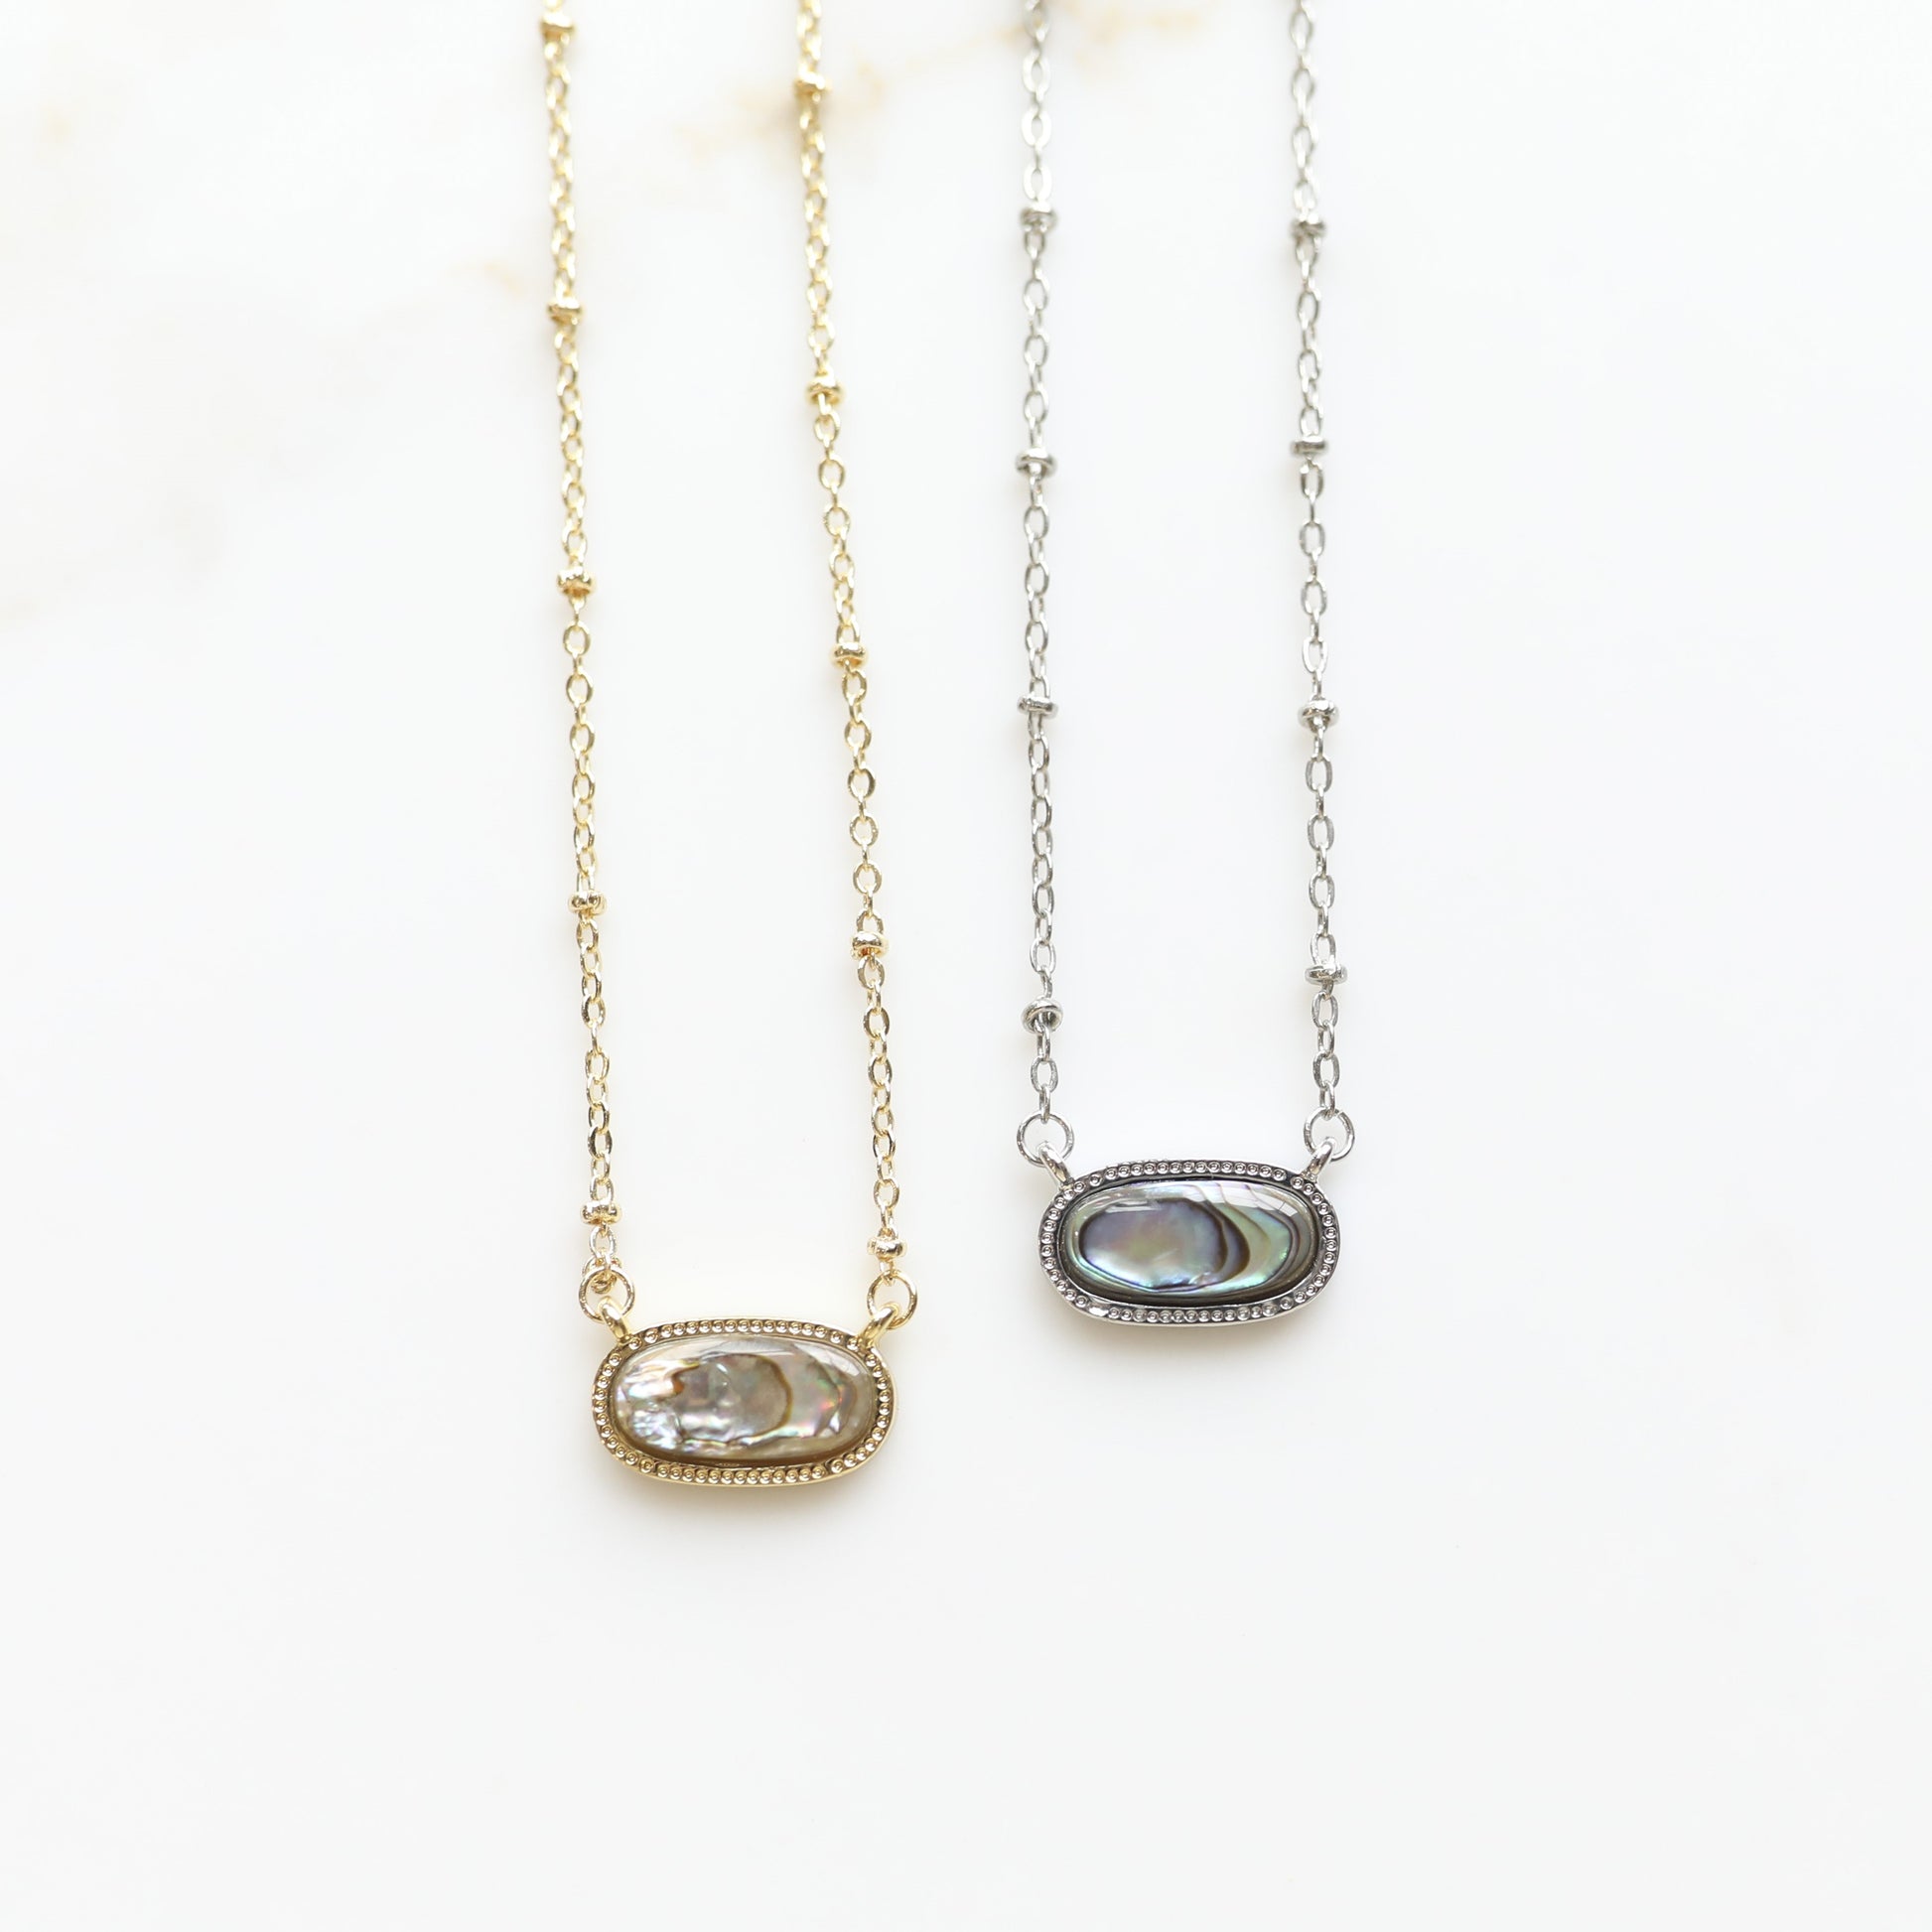 Meaningful Gemstone Necklace in Abalone available with a Gold or Silver chain